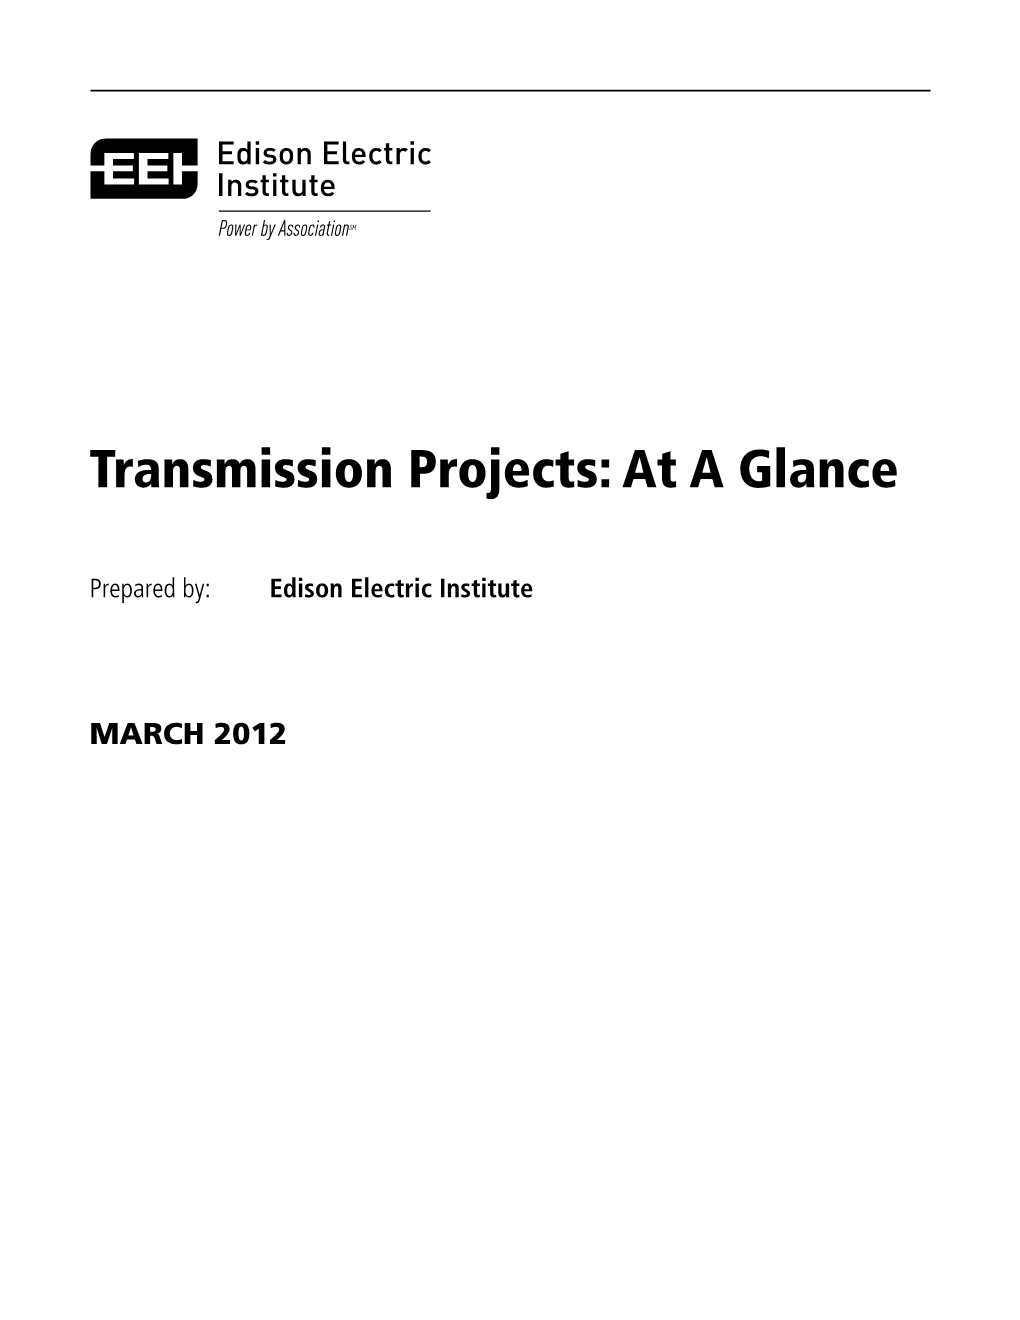 EEI's 'Transmission Projects